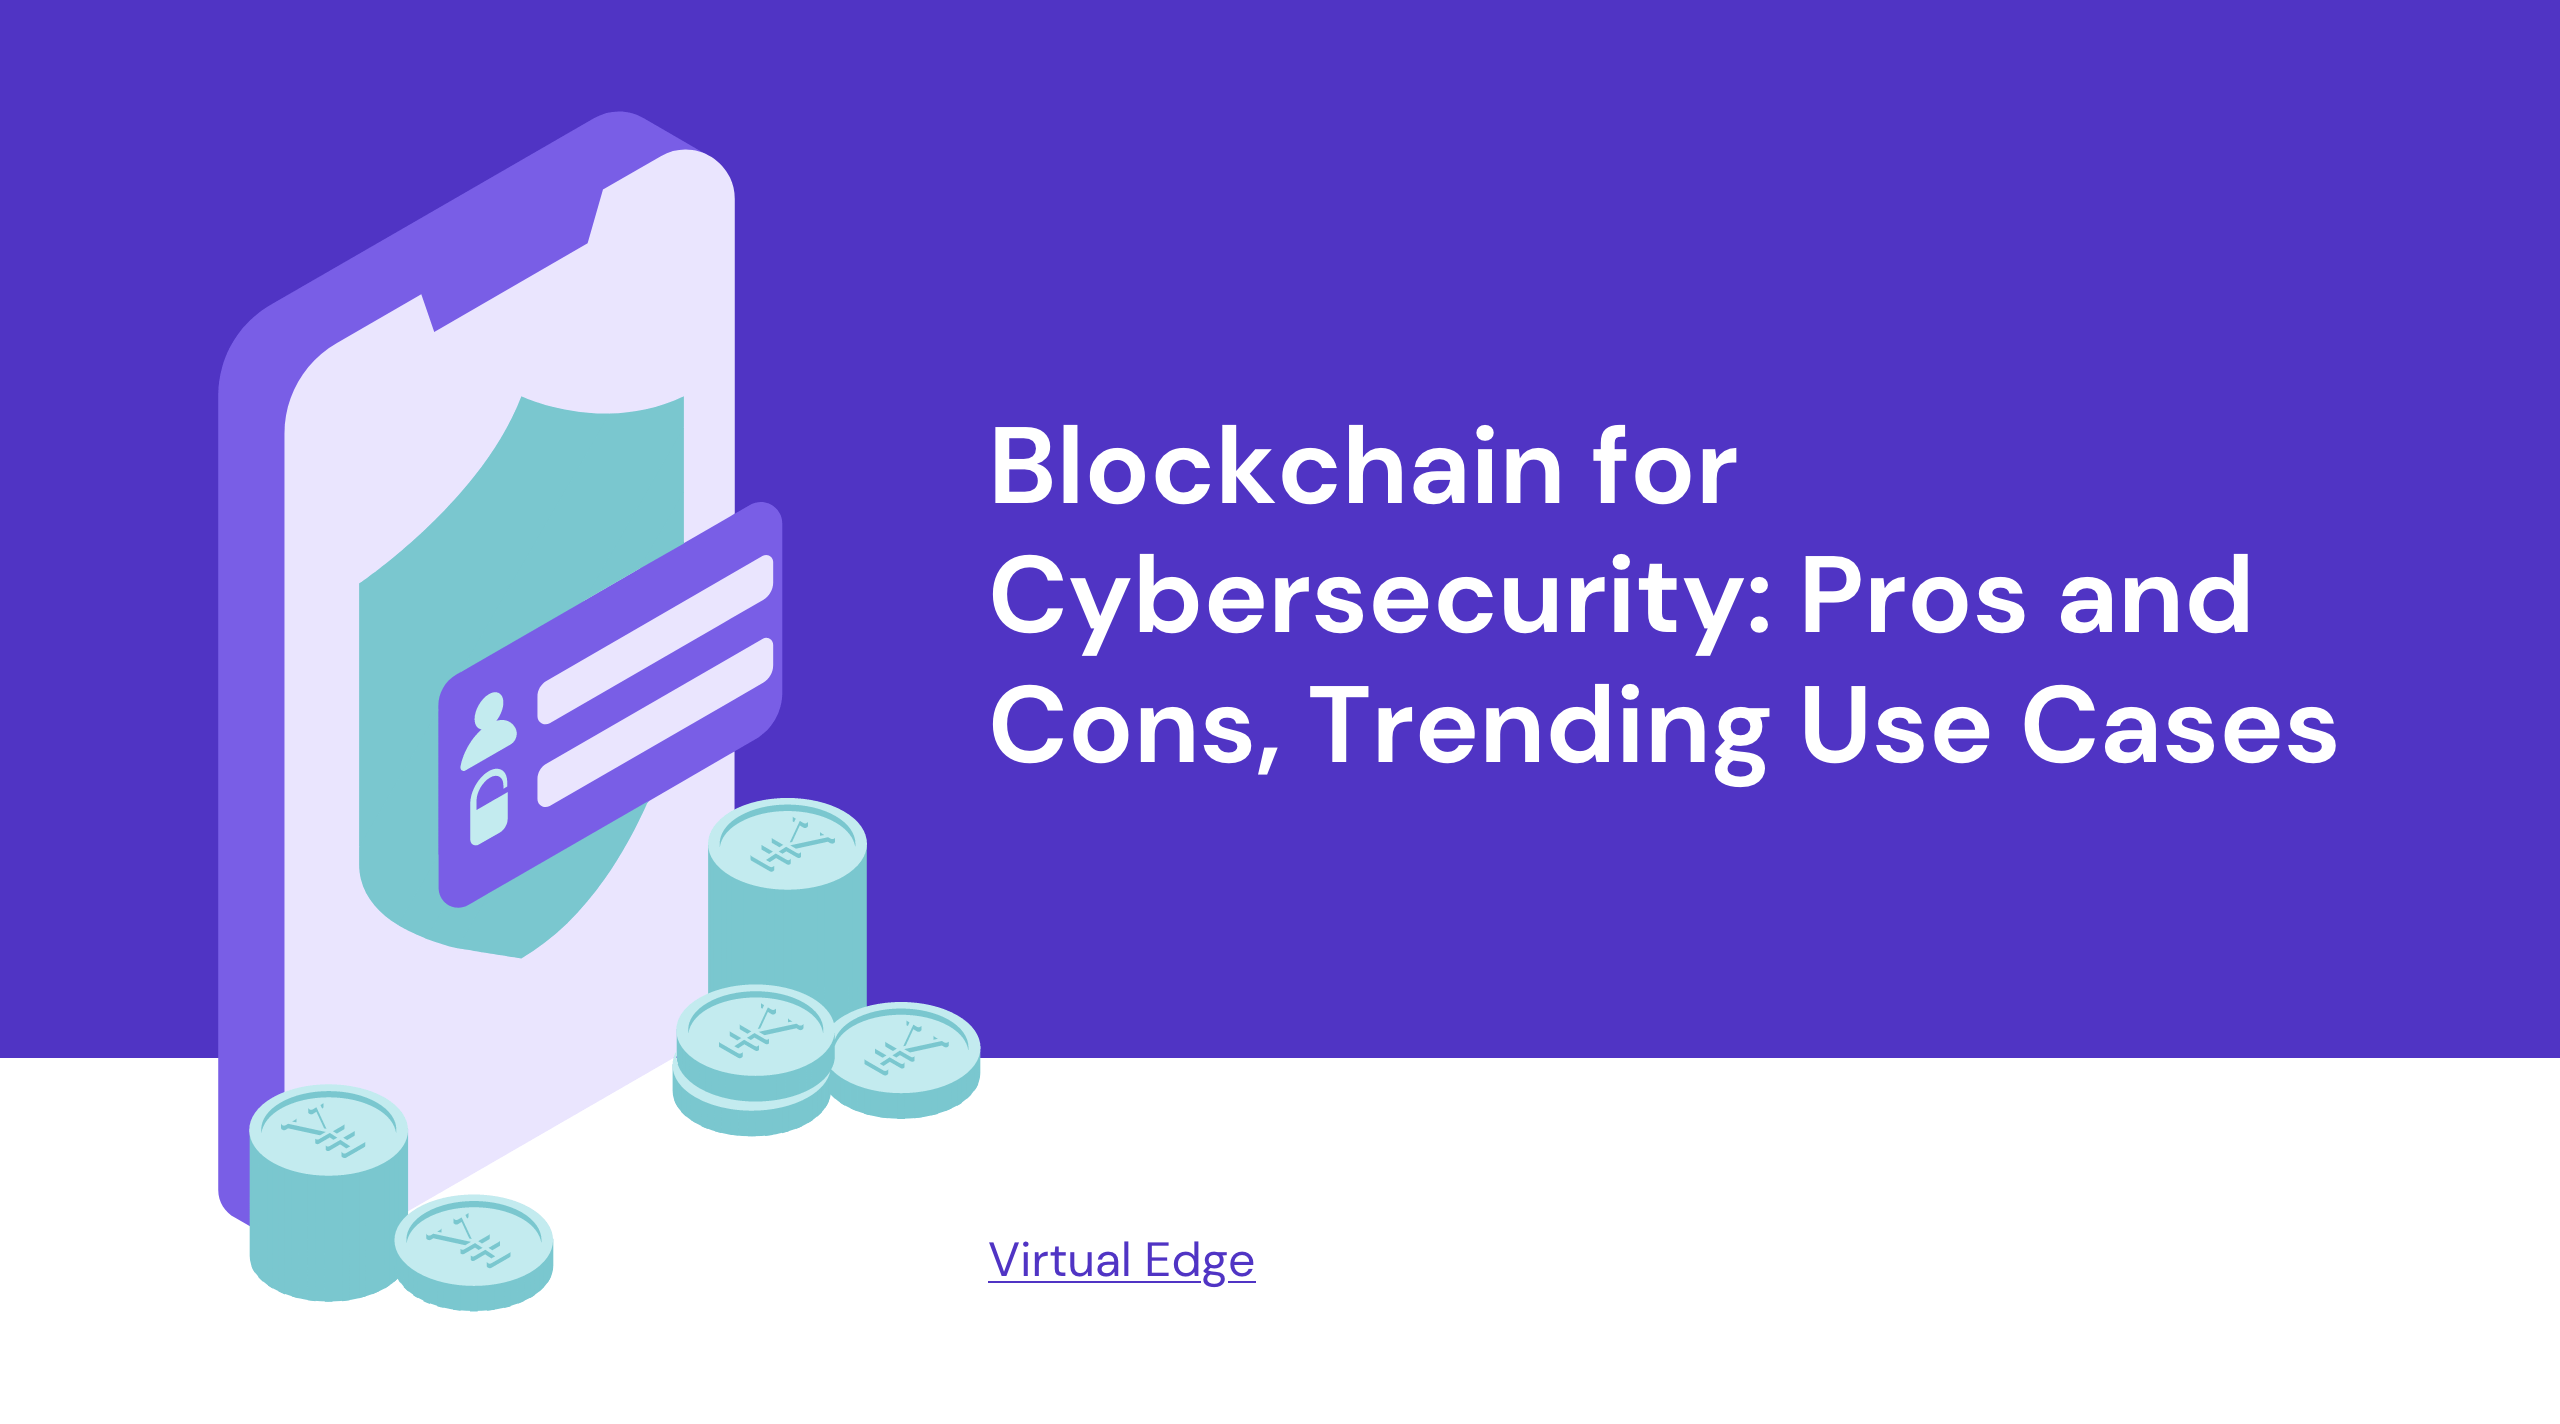 Blockchain for Cybersecurity: Pros and Cons, Trending Use Cases